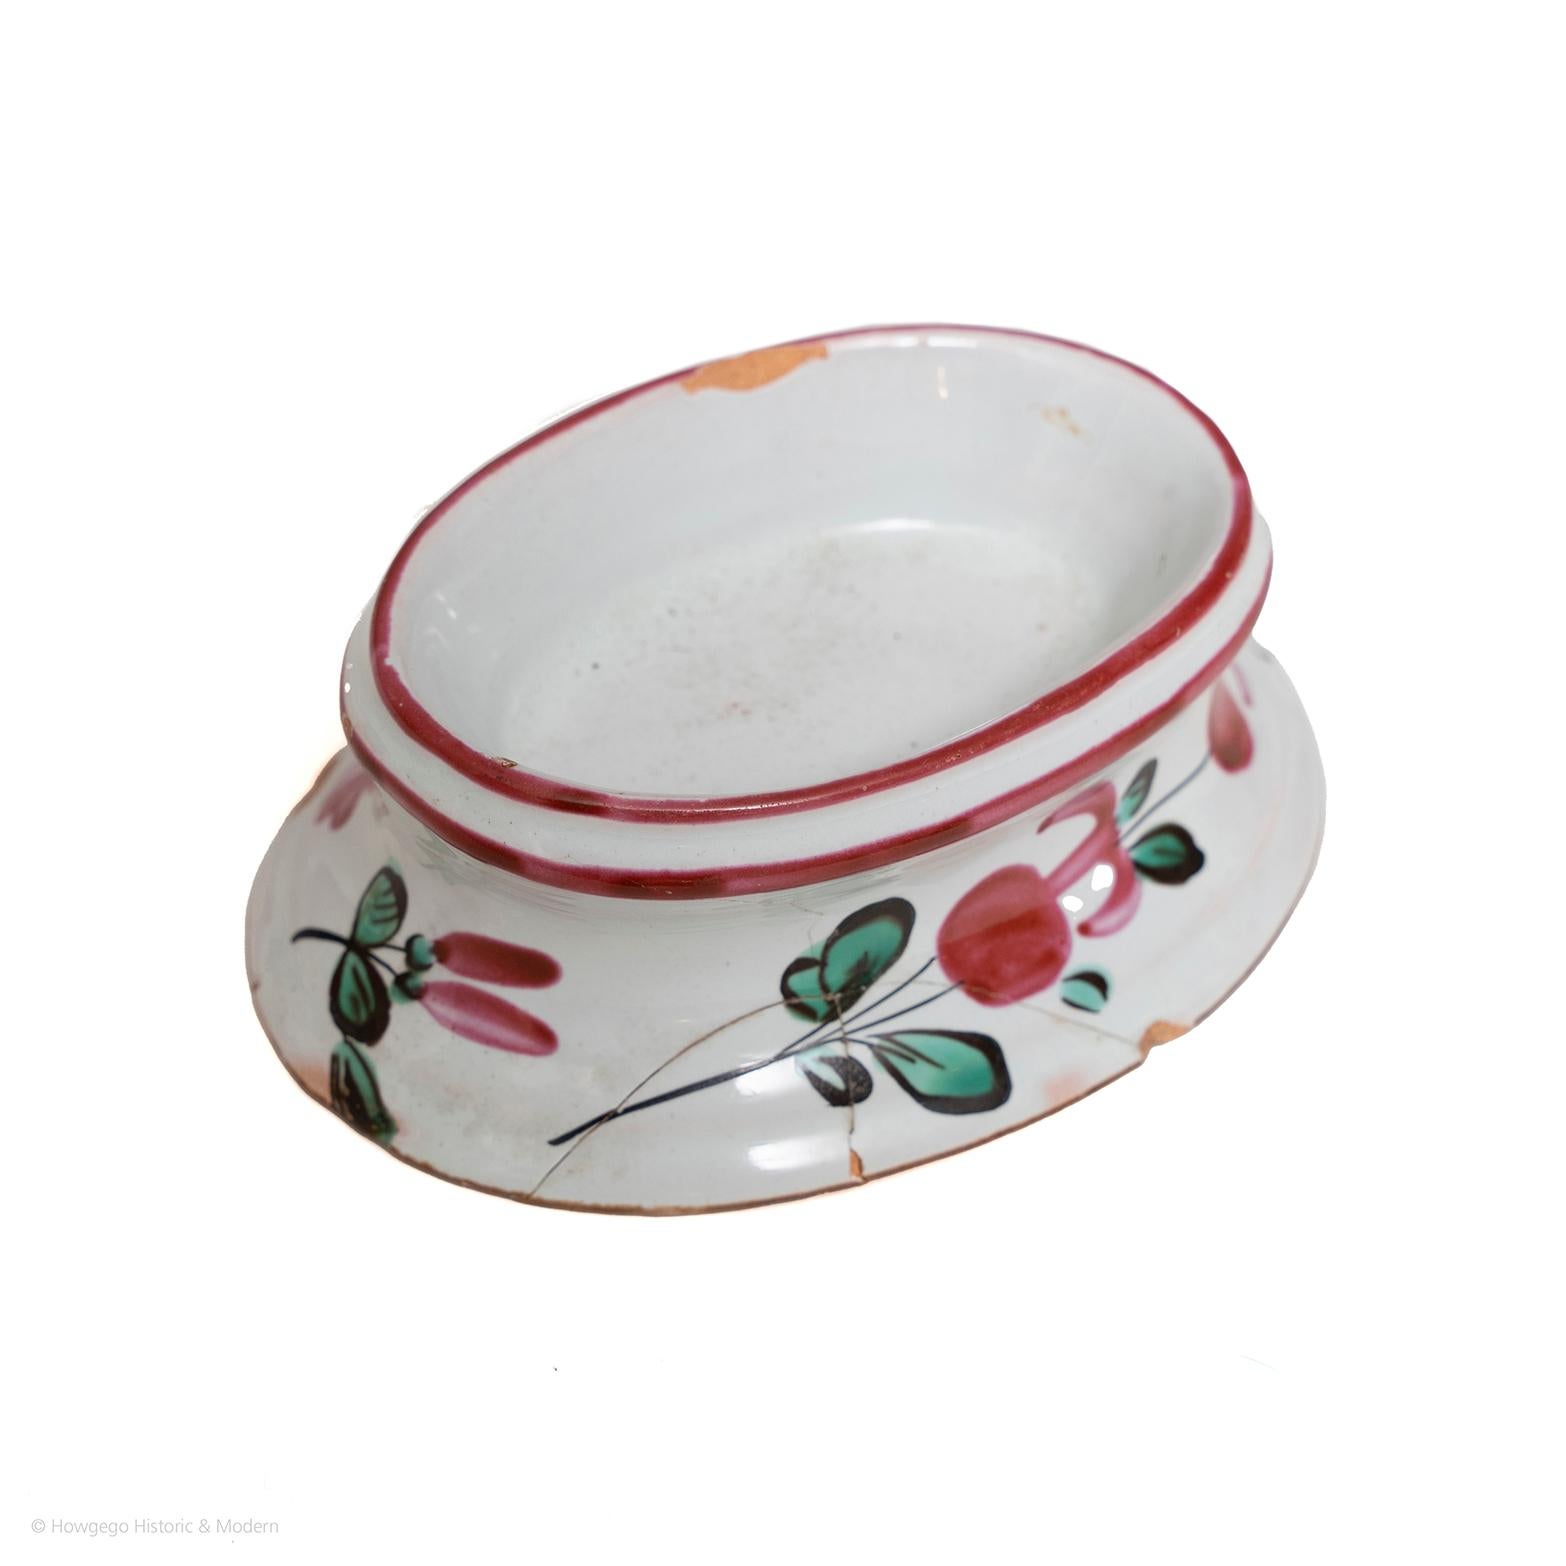 Rare surviving small piece of early tableware. Suitable for everyday use as a charming piece of history for the dining table.

two red bands around the top. the base decorated with two large floral sprays along the sides and the ends with two